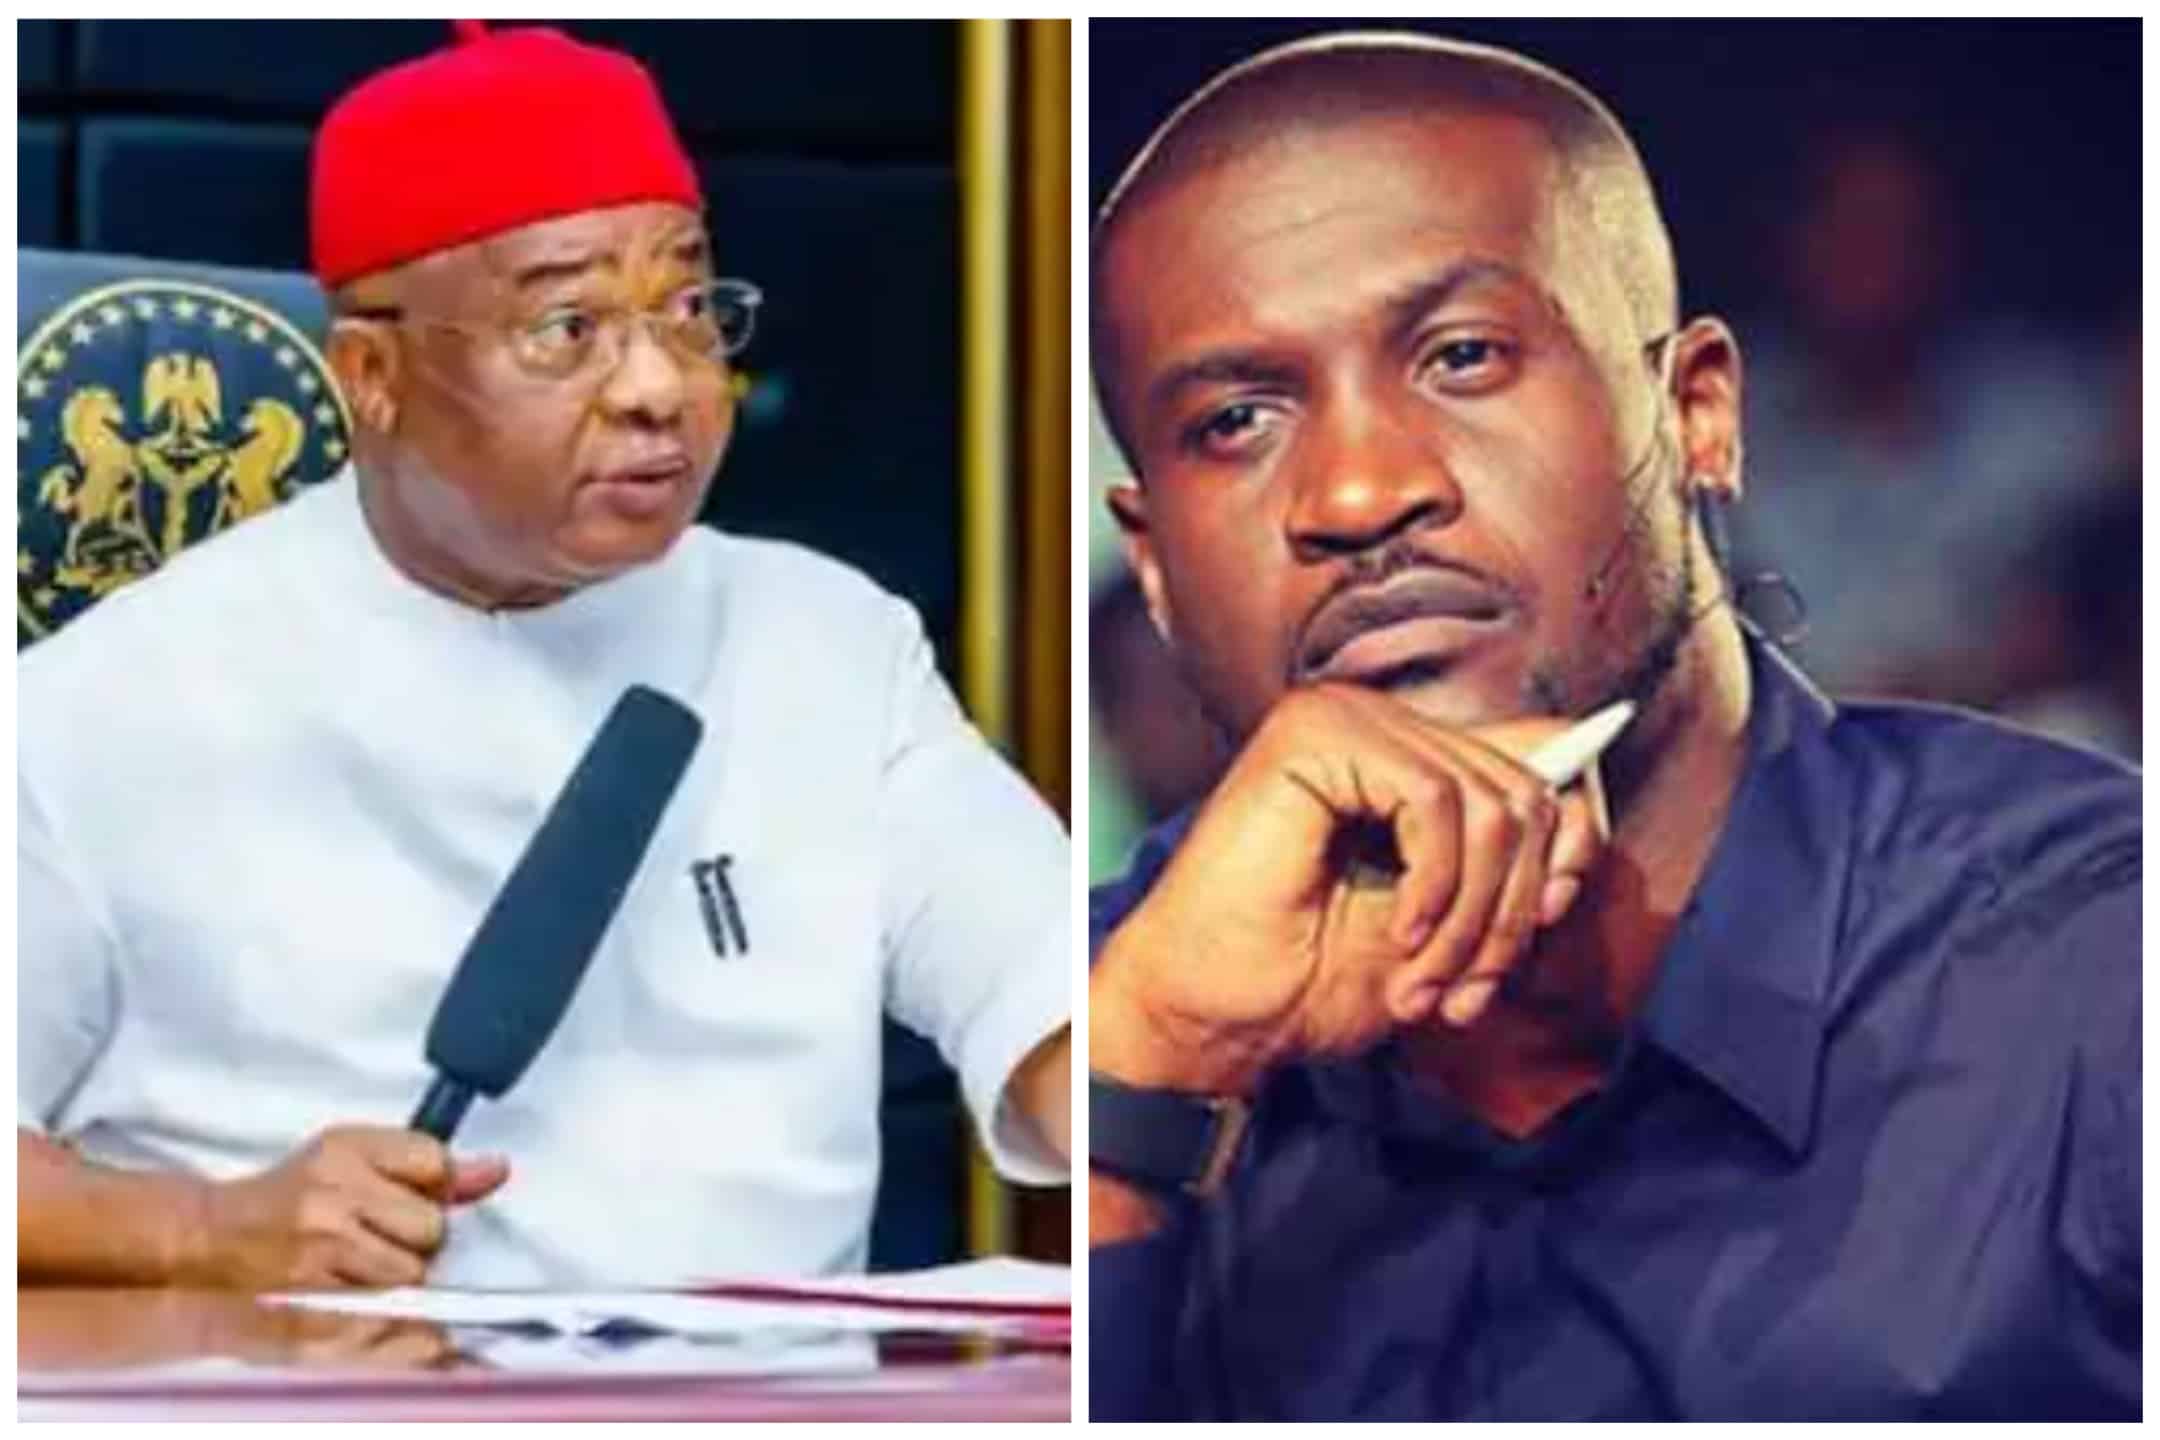 This Is So Ridiculous – Peter Okoye Slams Gov Uzodimma Over Promise Of 4,000 Jobs In Europe, Canada